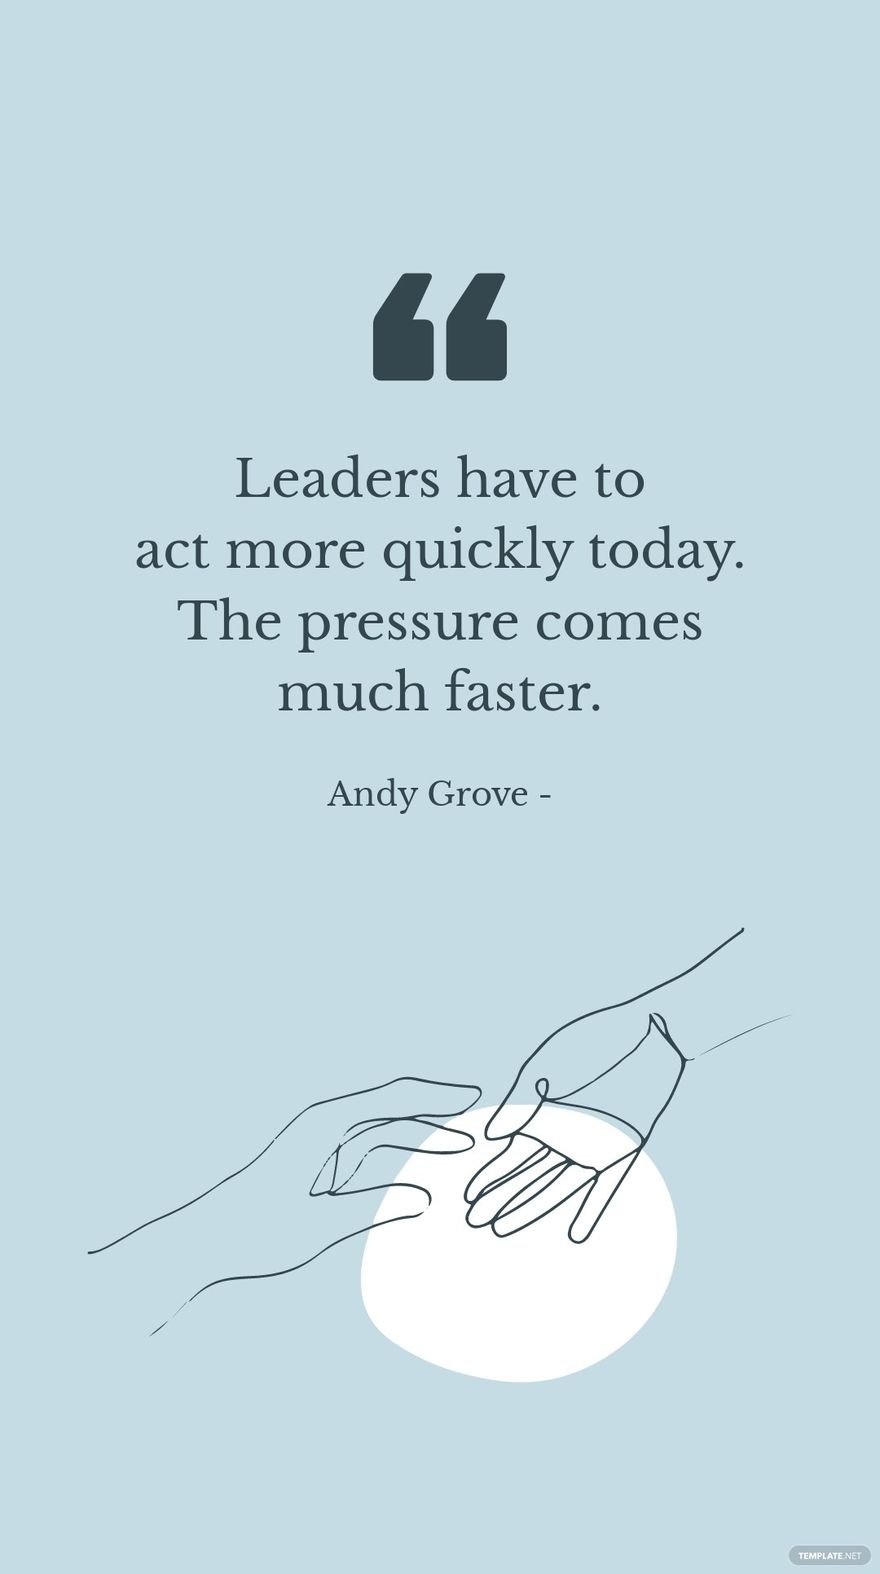 Andy Grove - Leaders have to act more quickly today. The pressure comes much faster.